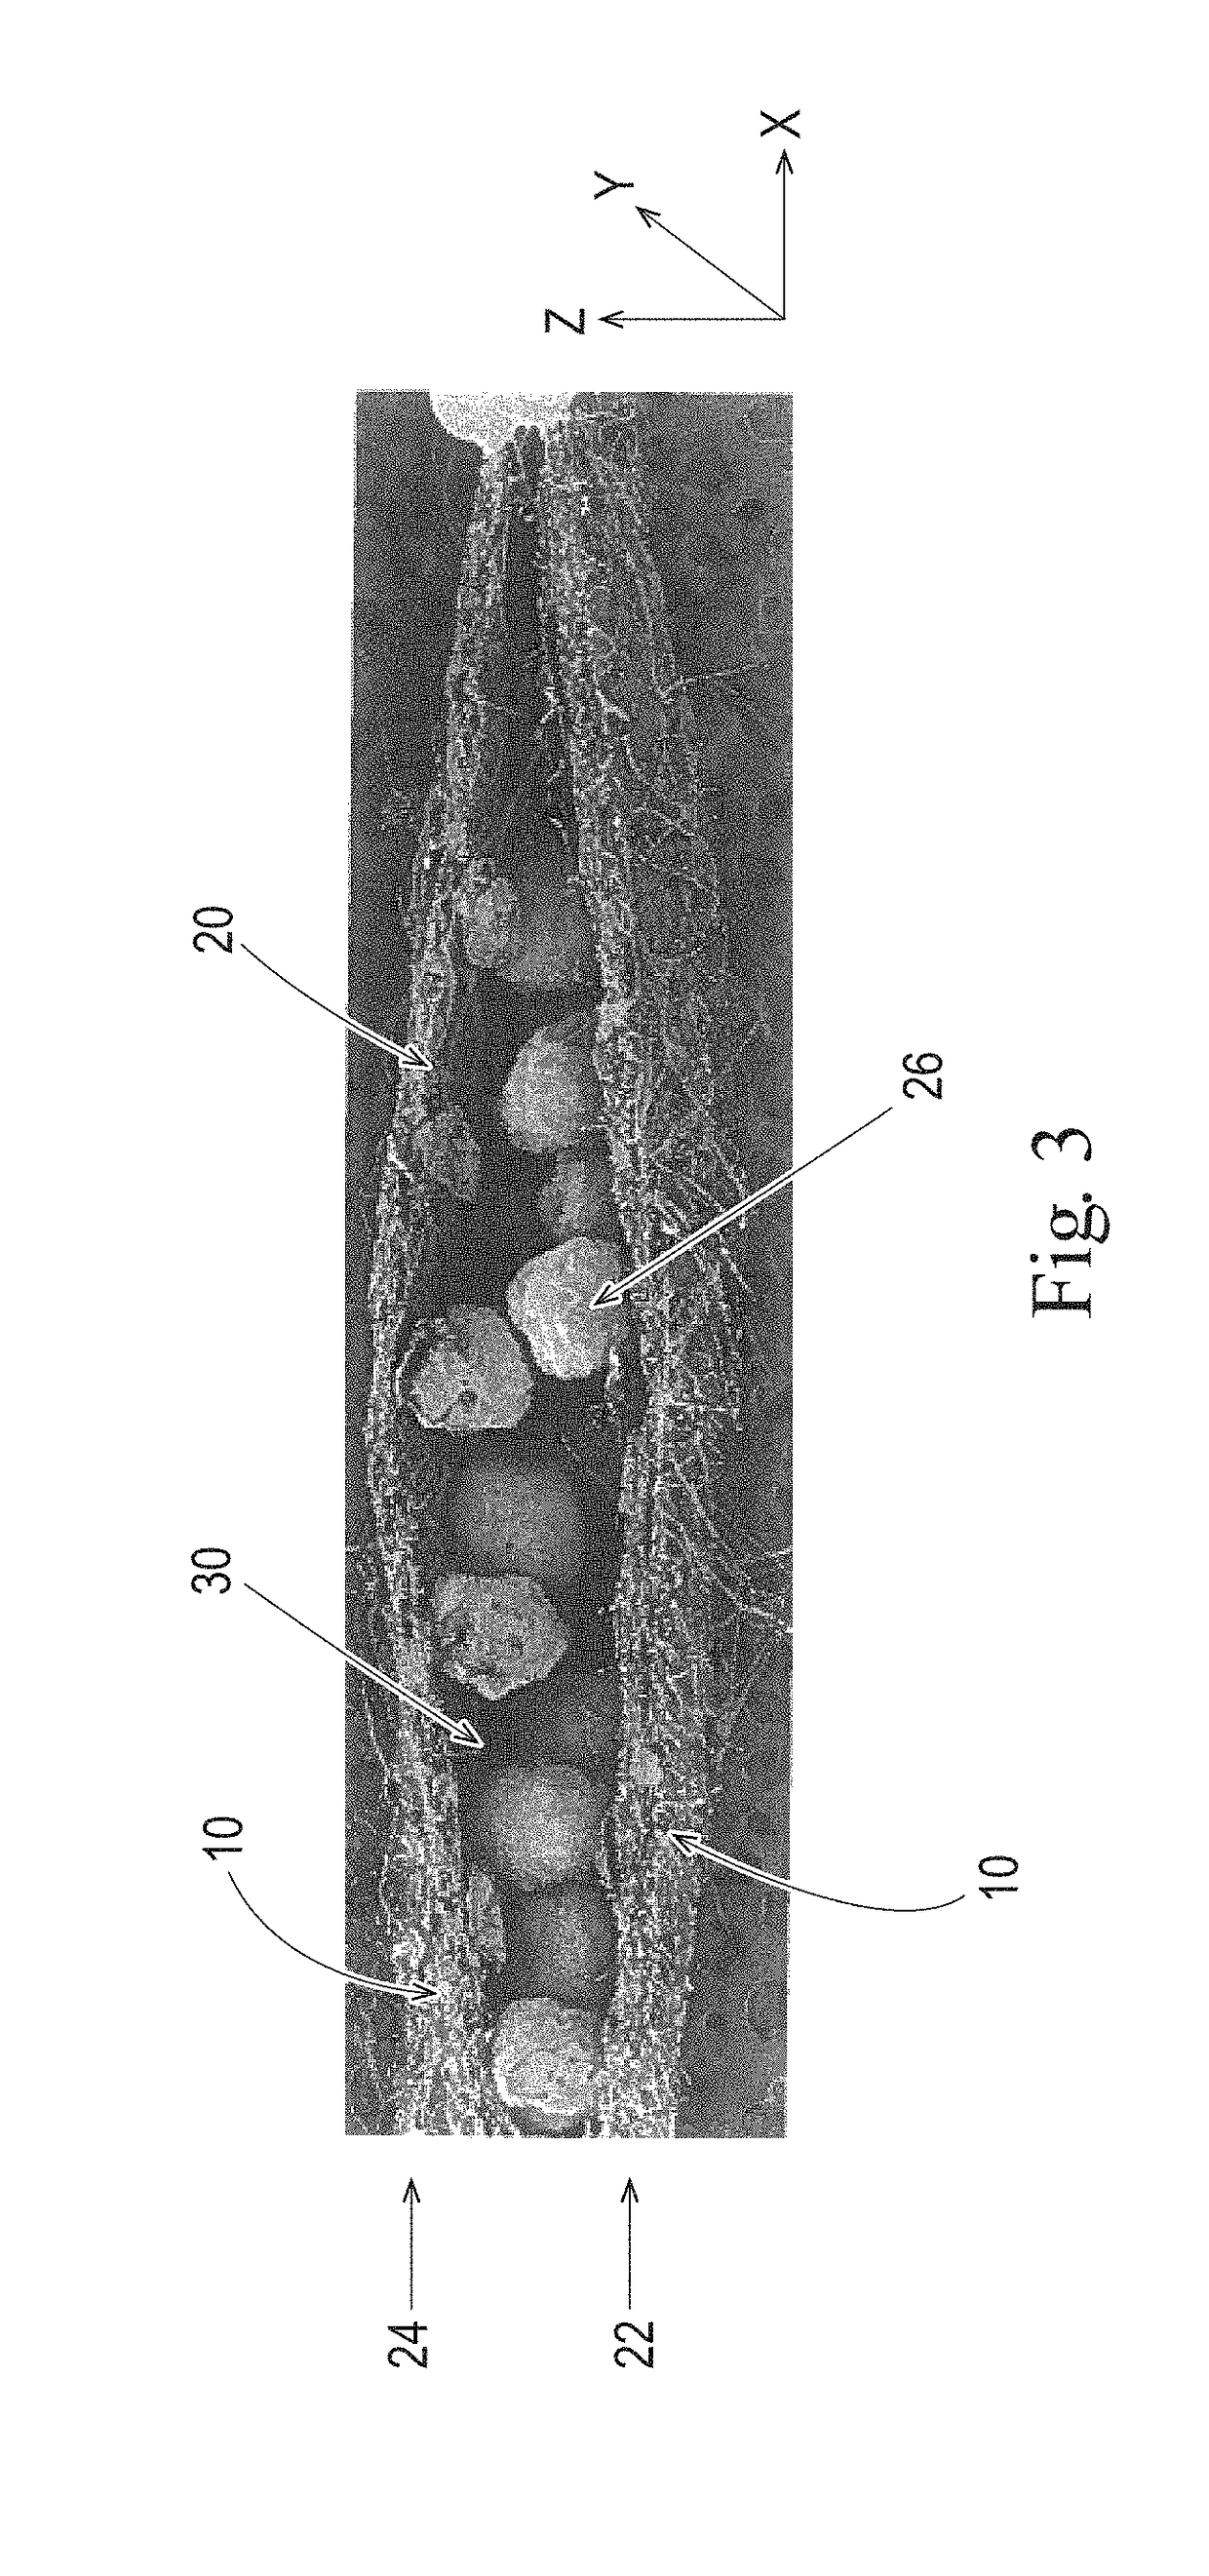 Conditioning hair care compositions in the form of dissolvable solid structures